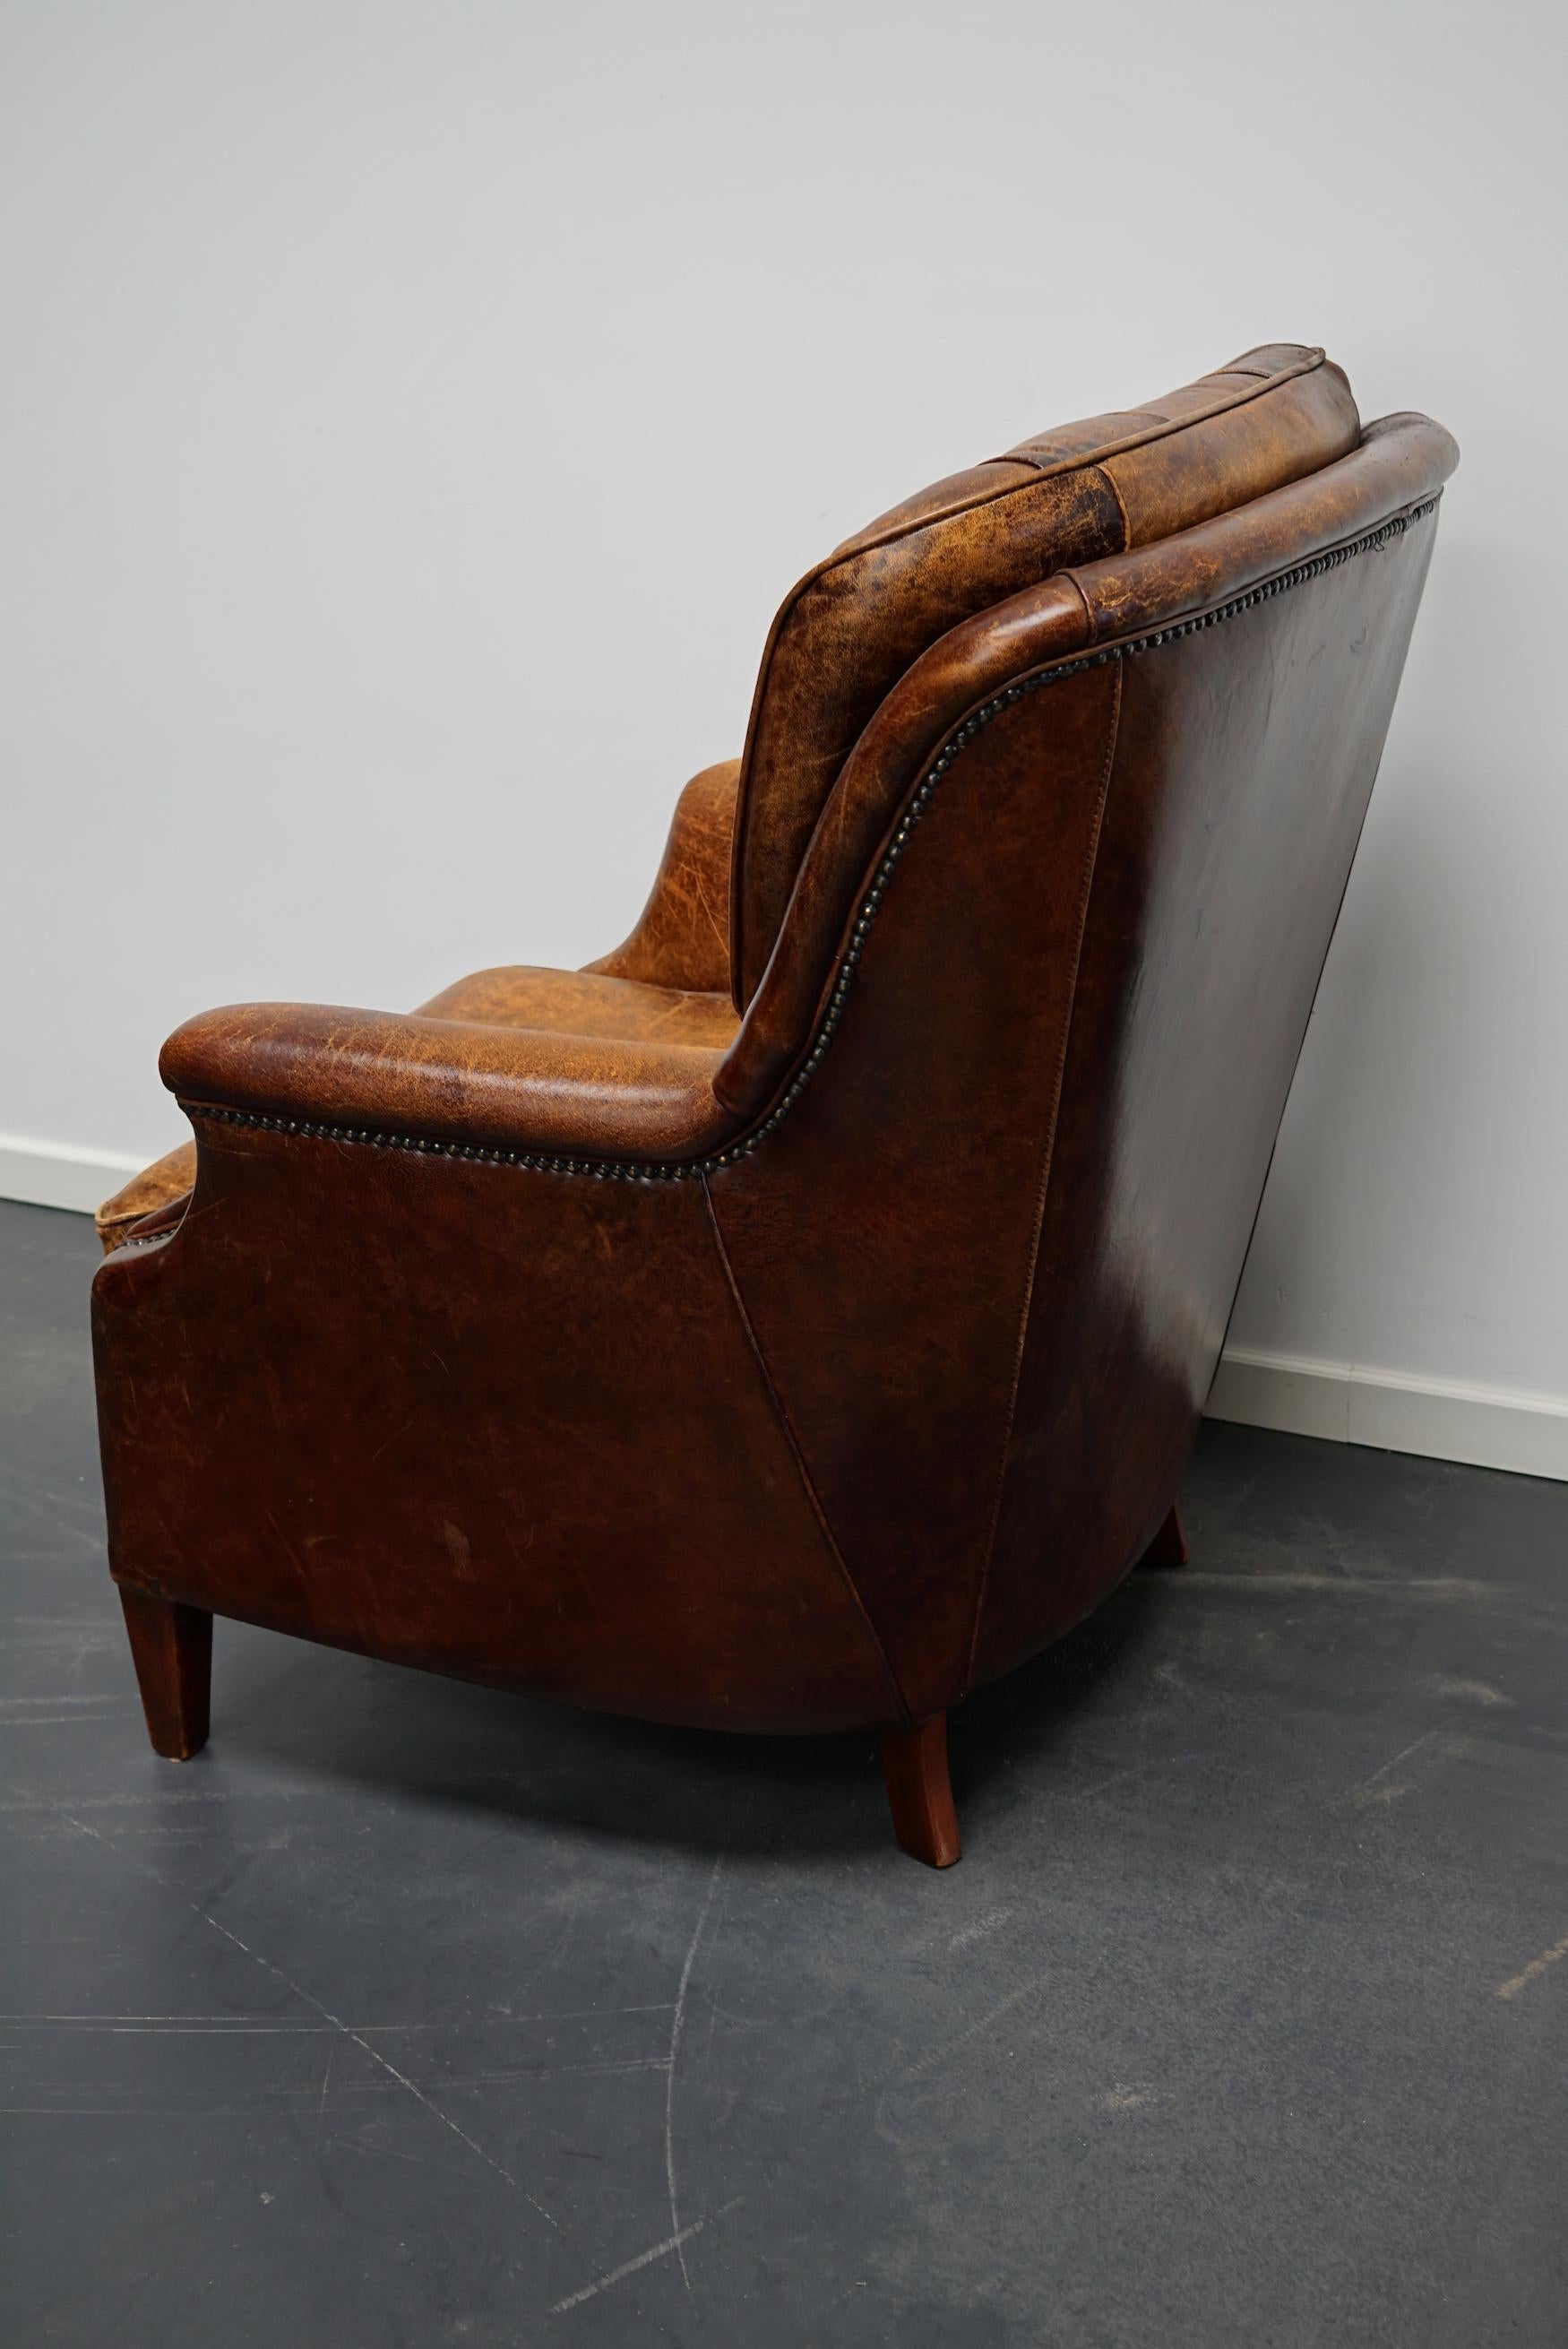 Late 20th Century Vintage Dutch Cognac Colored Leather Club Chair Chesterfield Style